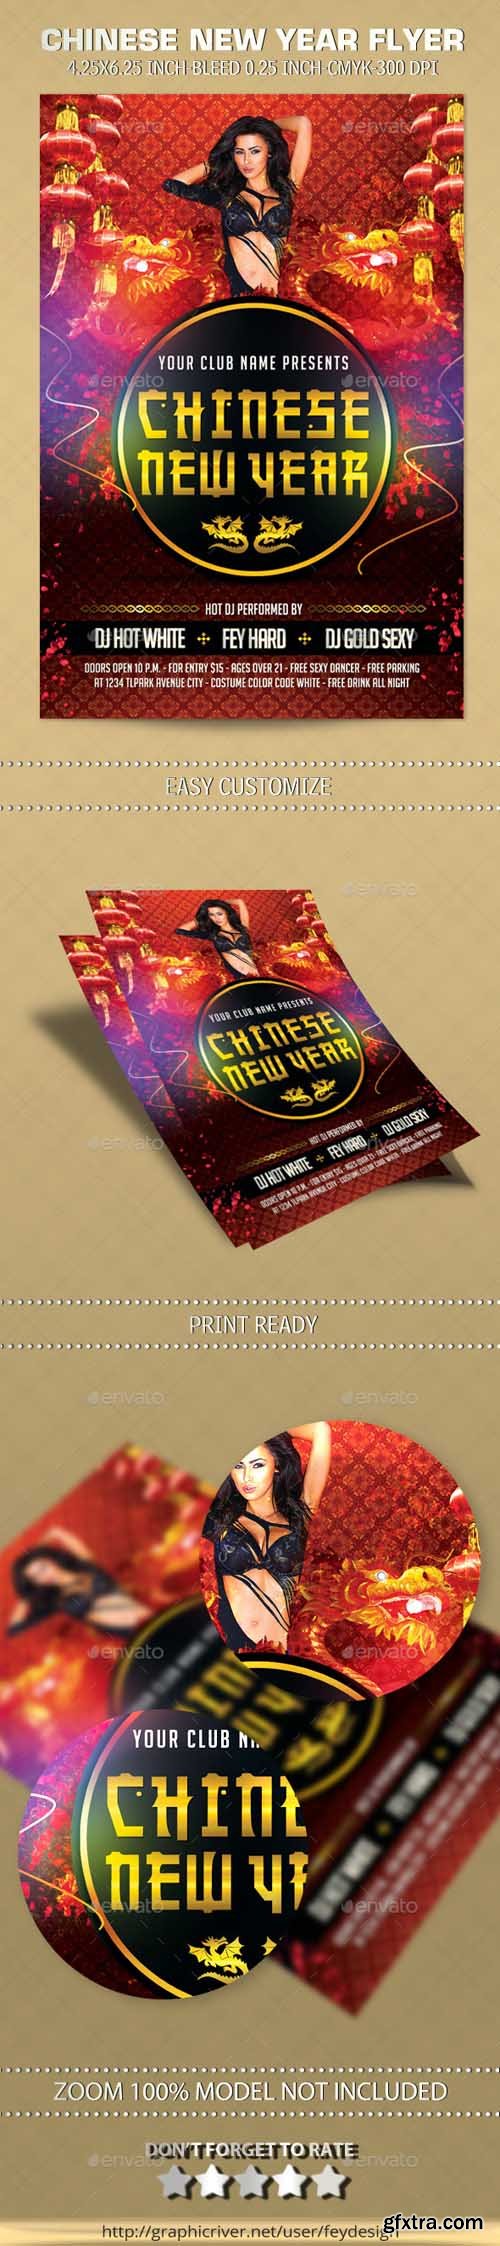 GR - Chinese New Year Flyer 9935104